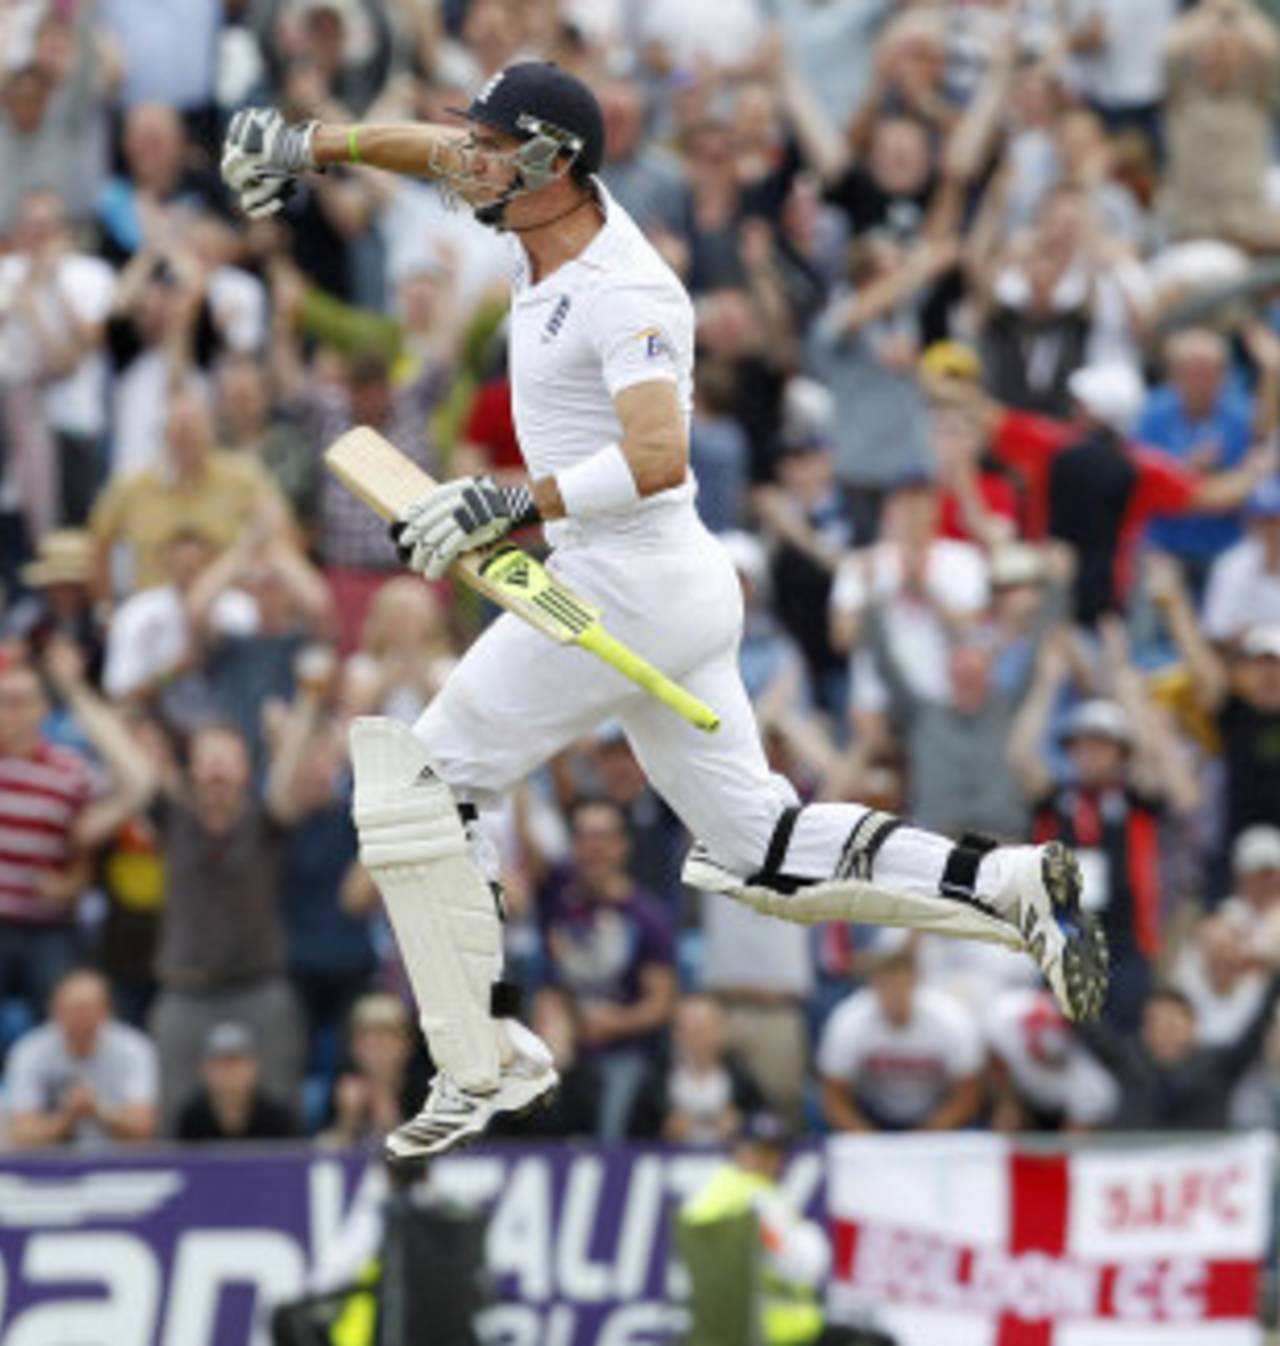 Kevin Pietersen celebrates his thrilling hundred, England v South Africa, 2nd Investec Test, Headingley, 3rd day, August 4, 2012